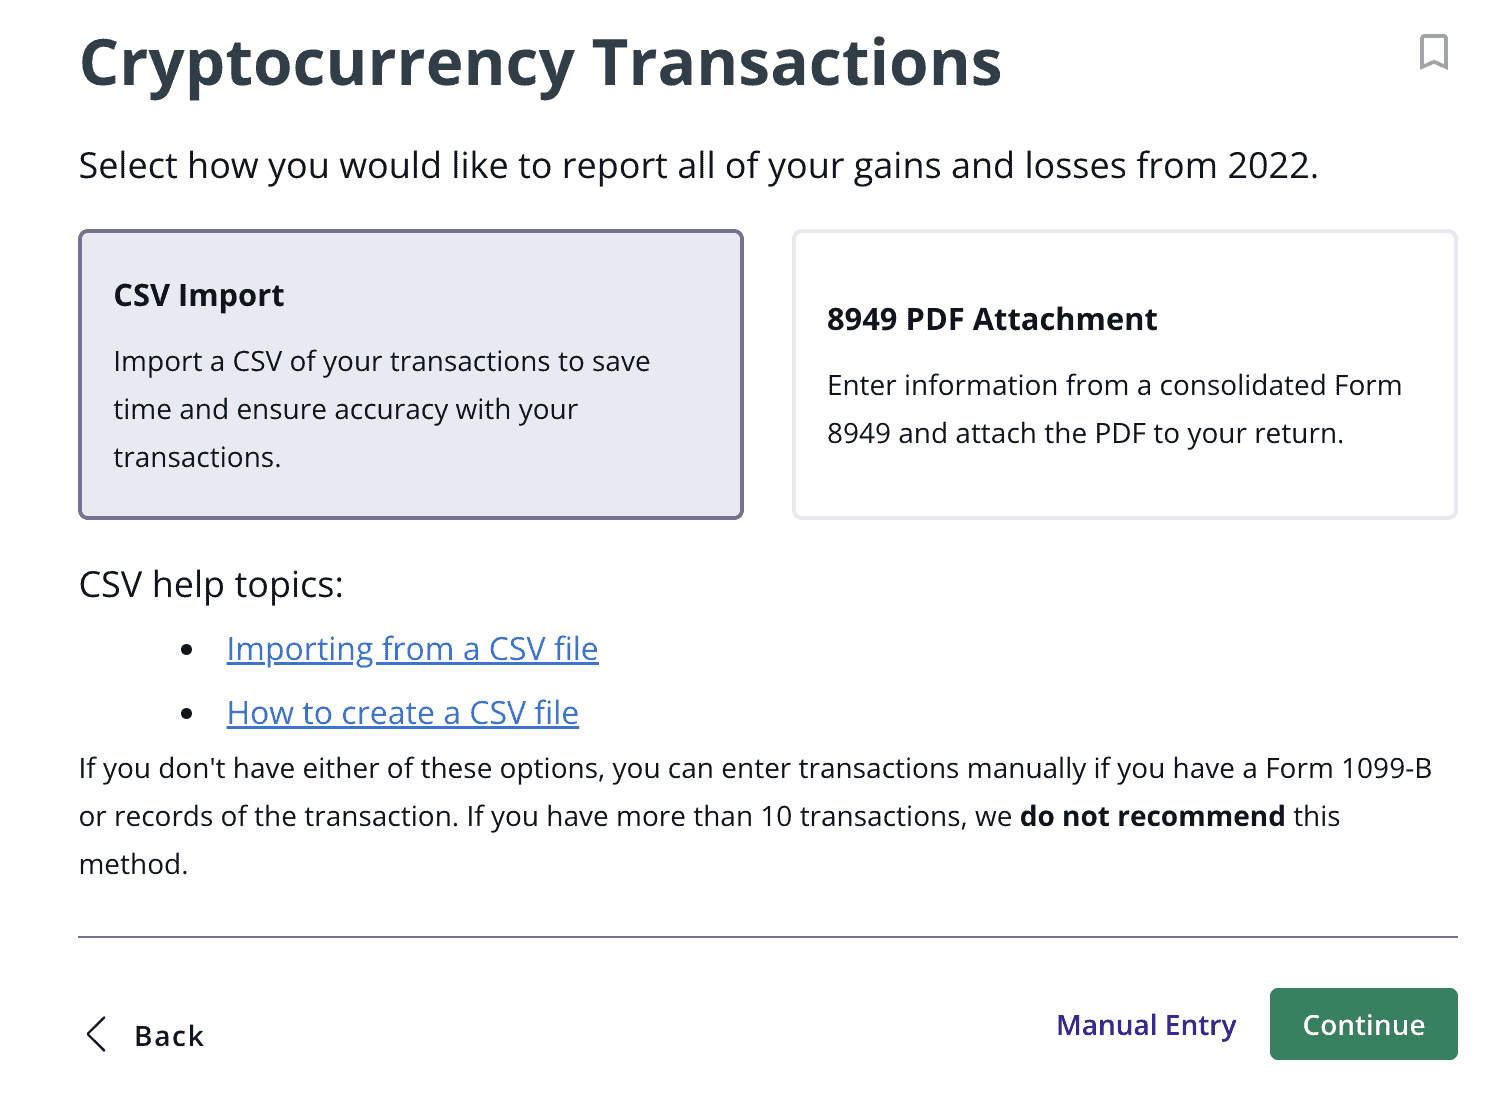 What To Do If You Received a 1099-K From Your Crypto Exchange